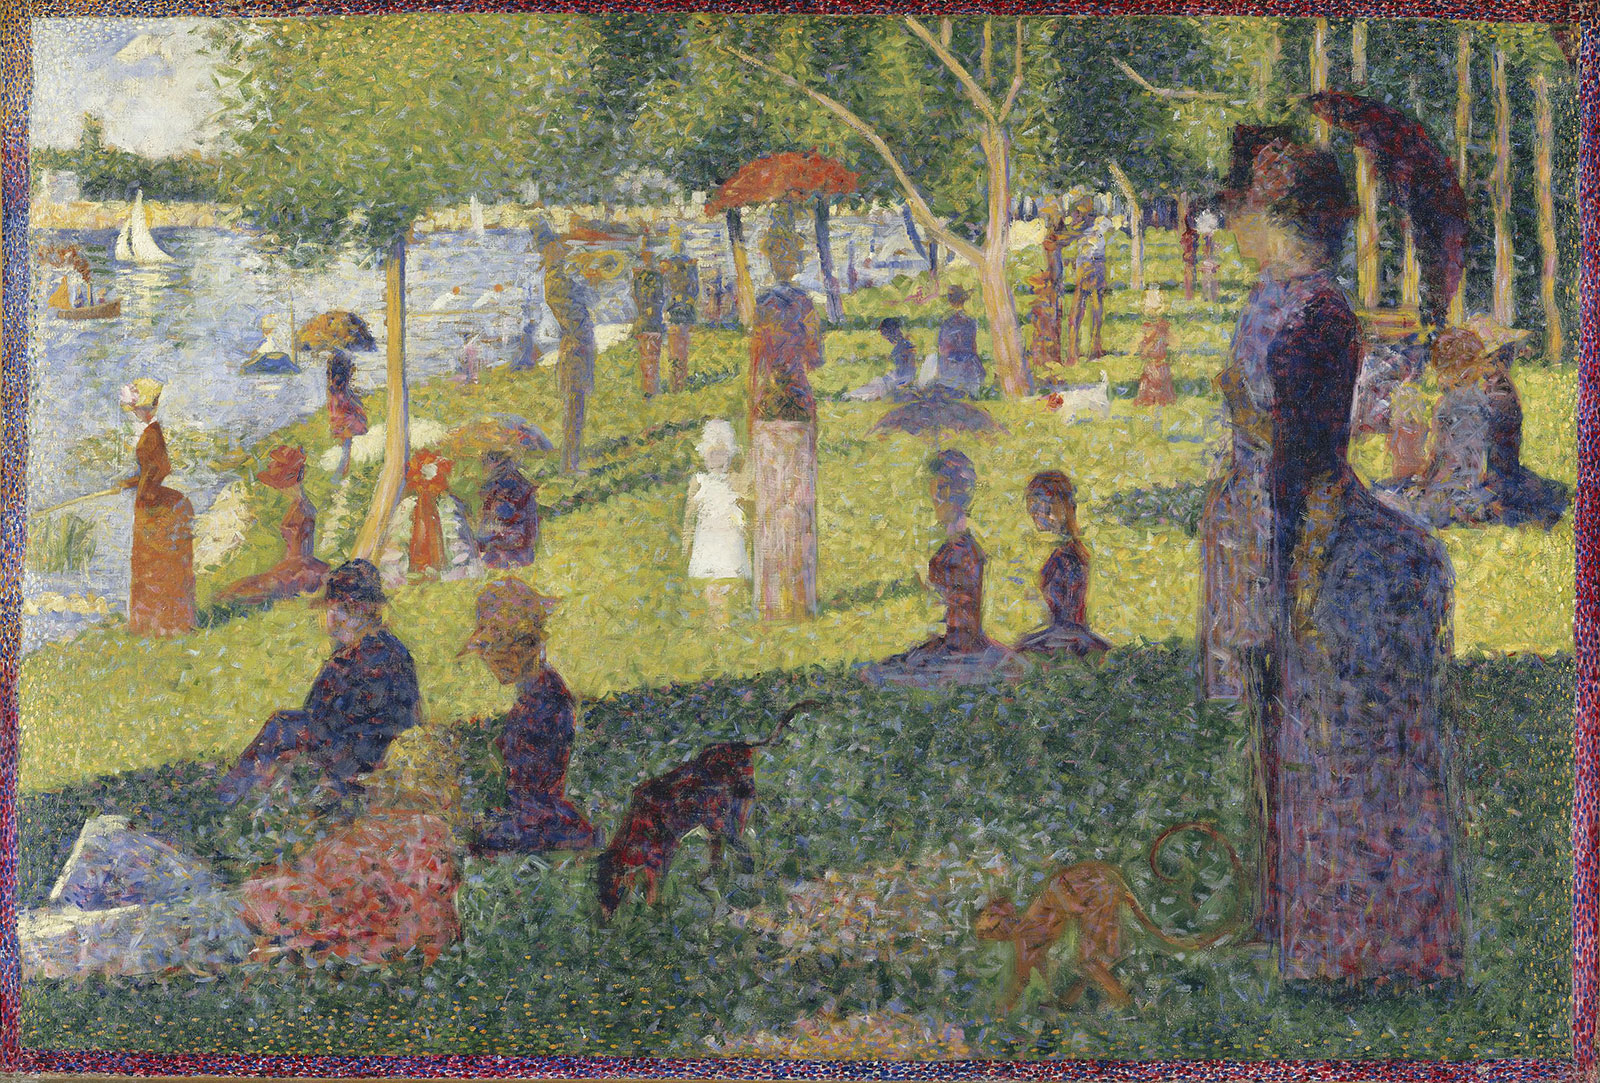 🎨 I’m Pretty Sure You Can’t Match at Least 14/20 of These Famous Paintings to the Artist A Sunday Afternoon On The Island Of La Grande Jatte Painting By Georges Seurat